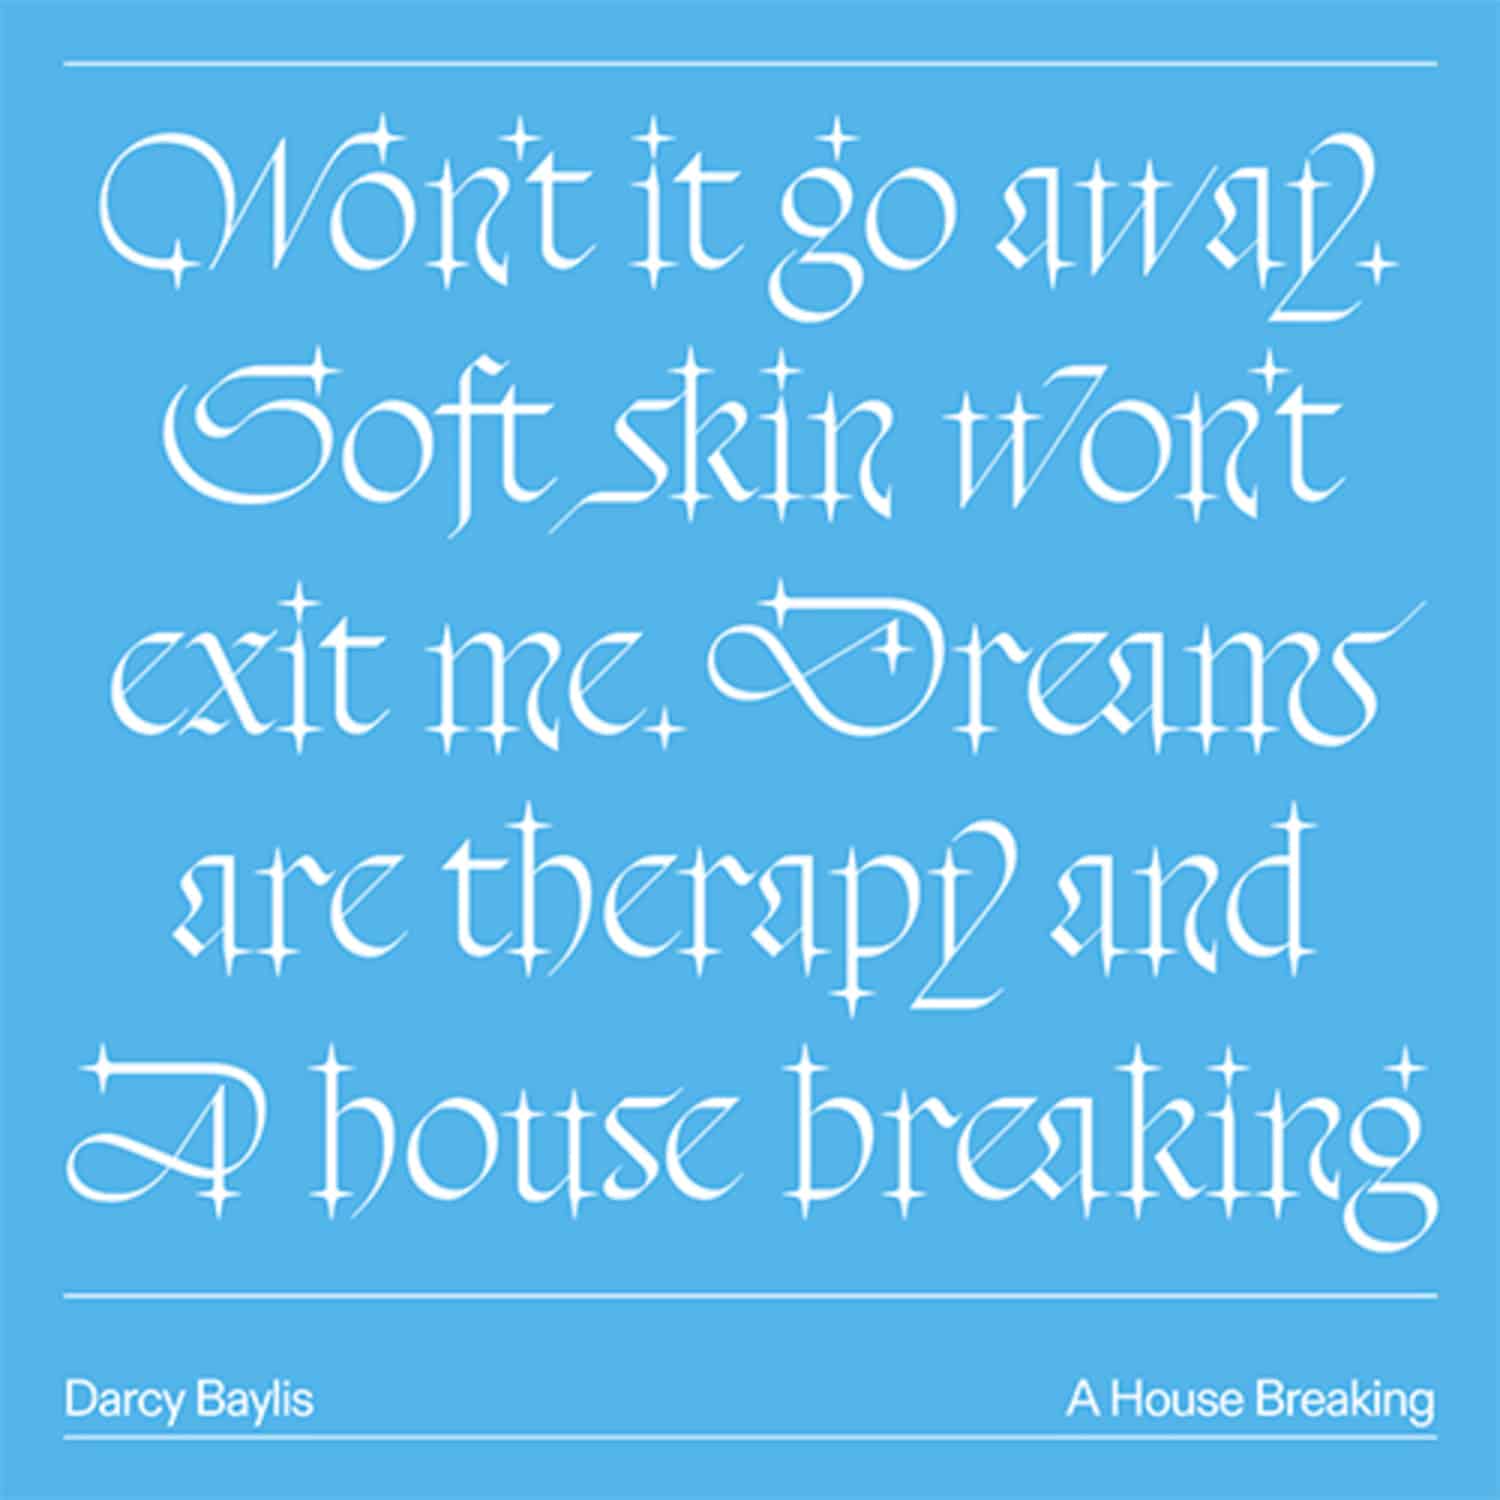 Darcy Baylis - A HOUSE BREAKING 